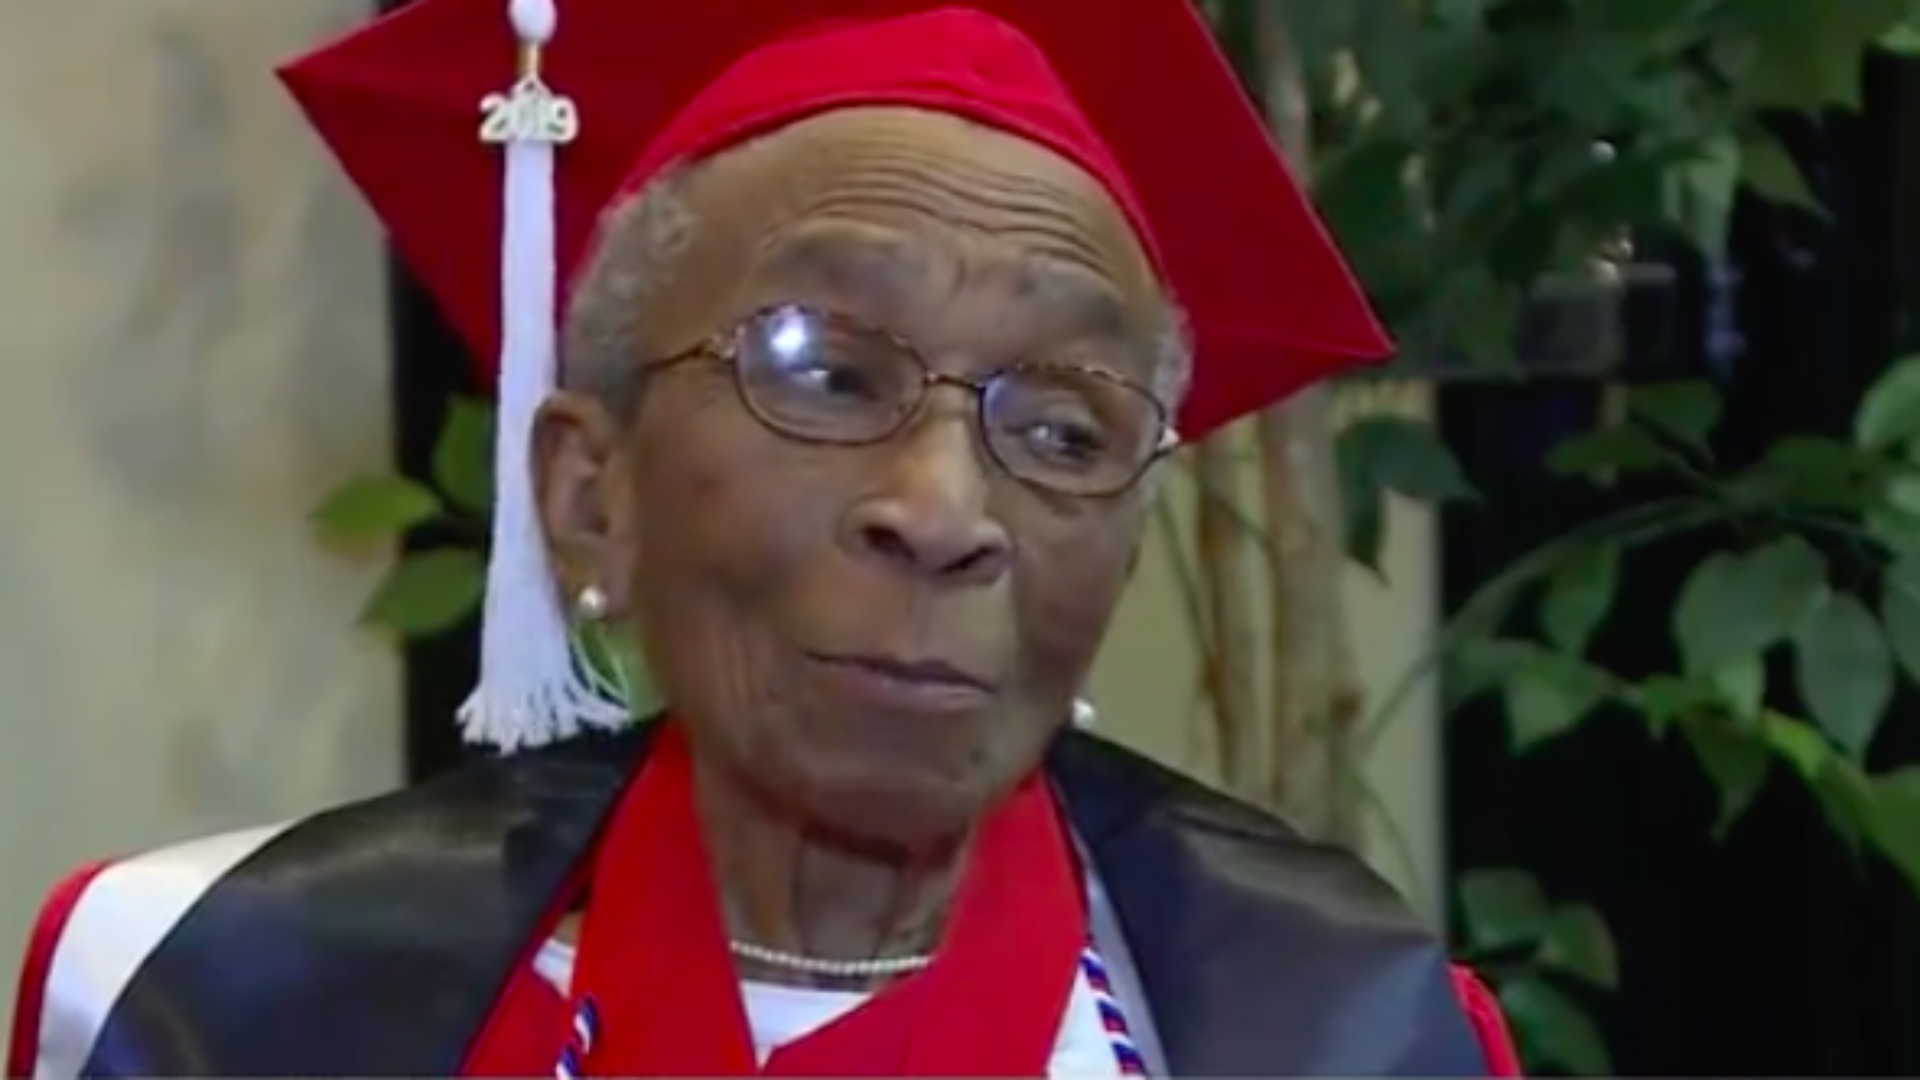 A 99-Year-Old Veteran Finally Got To Participate In Graduation Ceremony 70 Years After Earning Degree